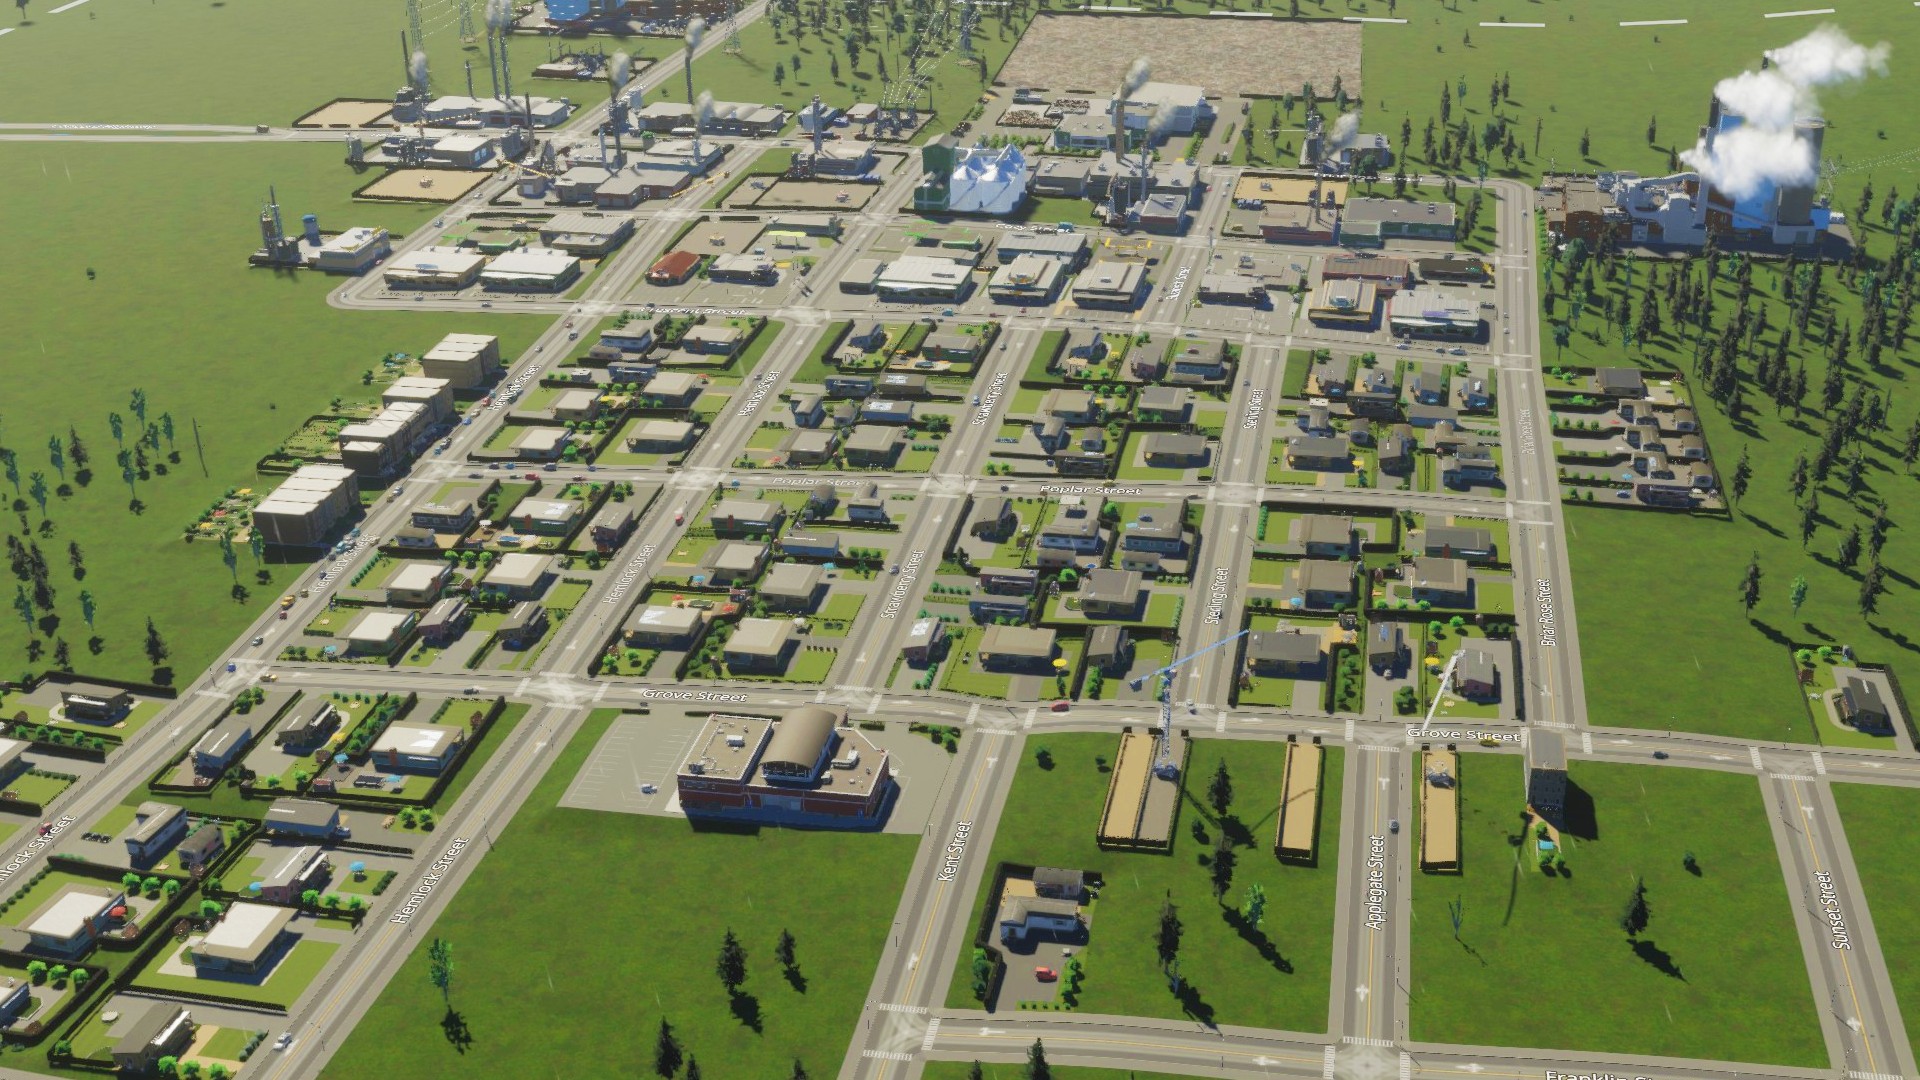 https://www.pcgamesn.com/wp-content/sites/pcgamesn/2023/10/cities-skylines-2-review-cs-city-building-game-paradox-colossal-order.jpg